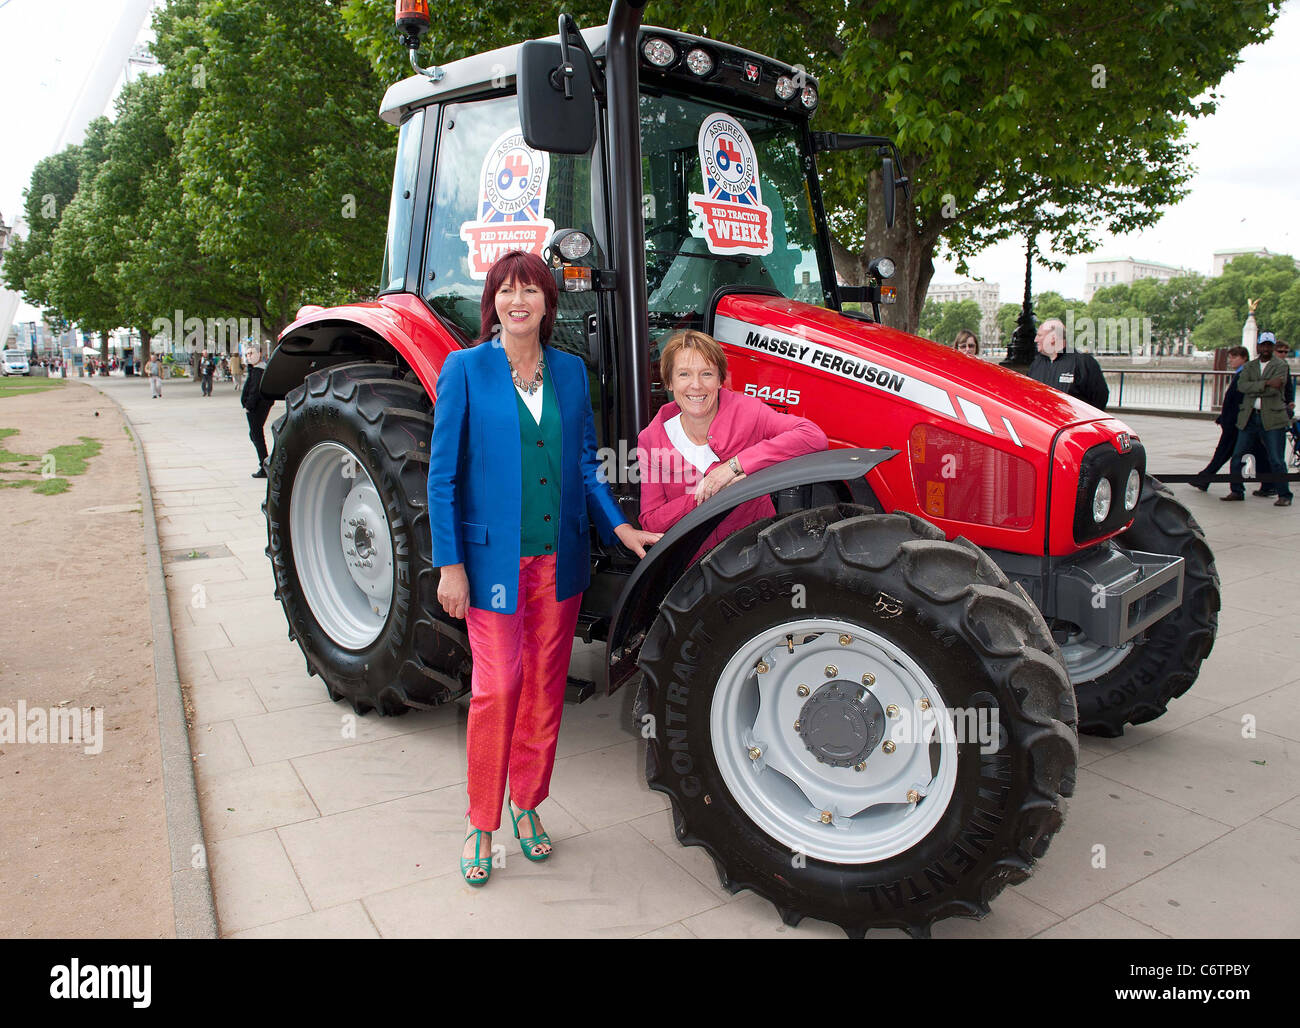 Janet Street Porter and environment secretary Caroline Spelman cut a giant Tractor cake to celebrate 10 years of Great Food and Stock Photo